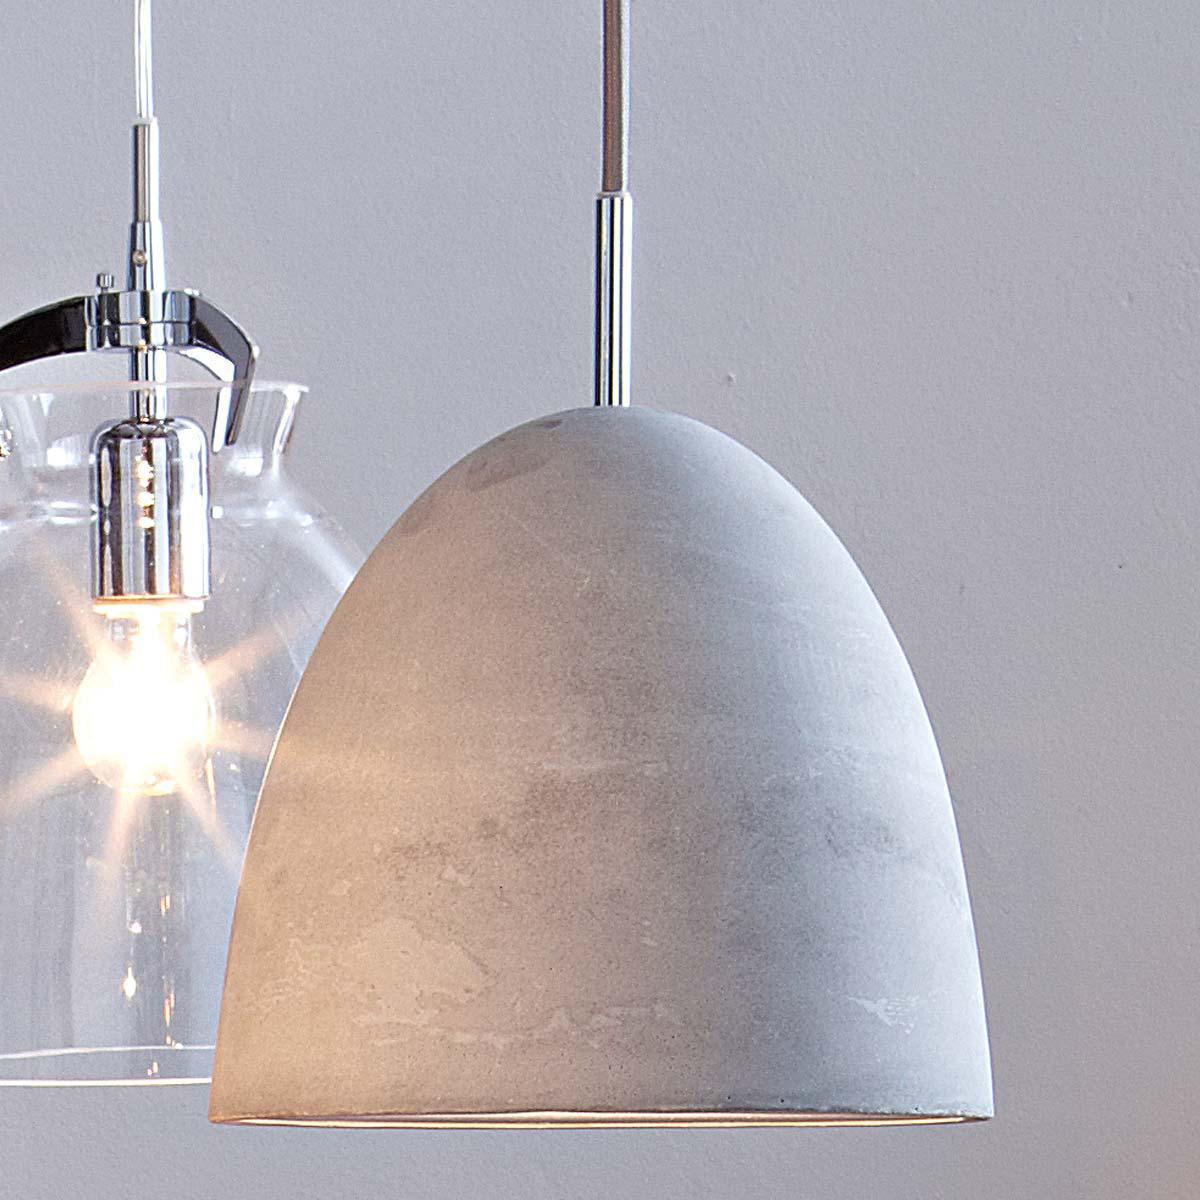 CASTLE Pendant desires to challenge your every perception of texture and lighting. As a material, concrete is exceptionally energy efficient compared to that of metal or glass. By using concrete as a lampshade the CASTLE Pendant has responsibly kept